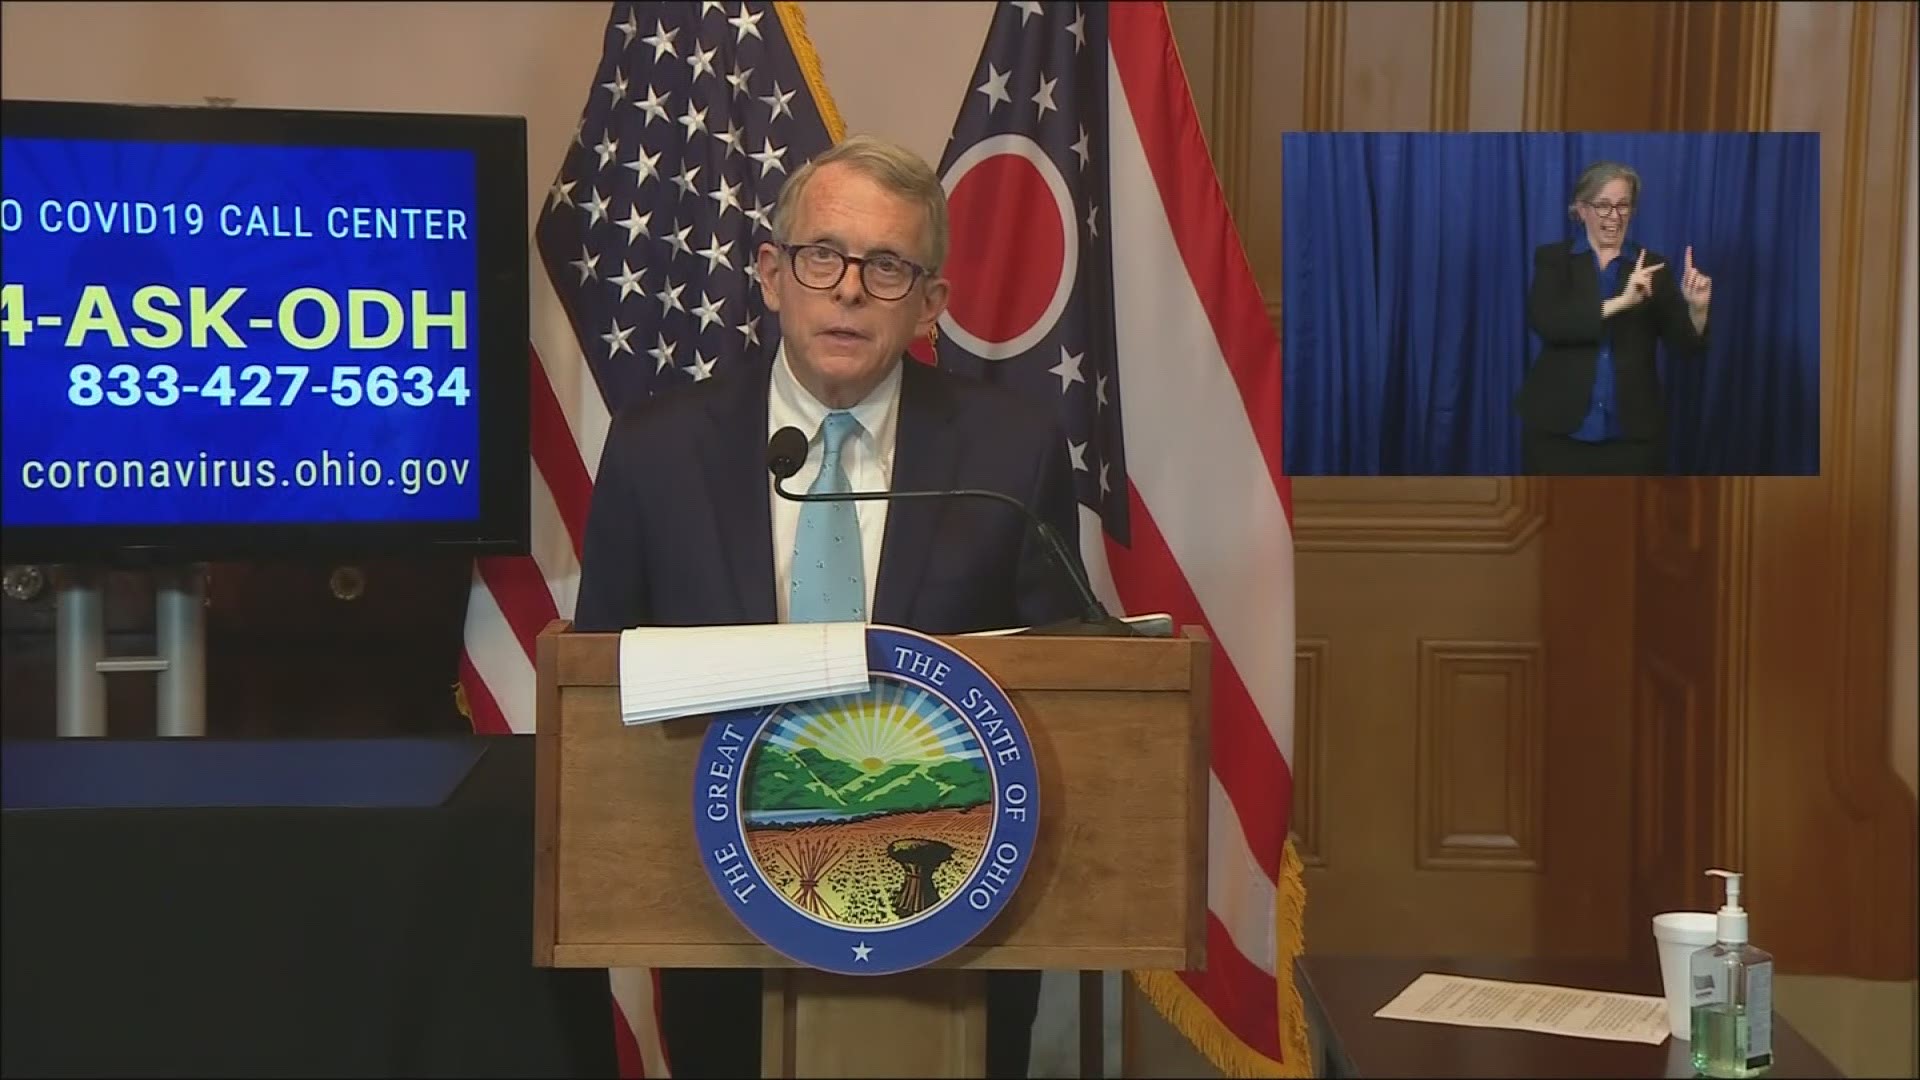 Ohio Governor Mike DeWine announced on Monday that he has extended the closure of K-12 schools to at least May 1.